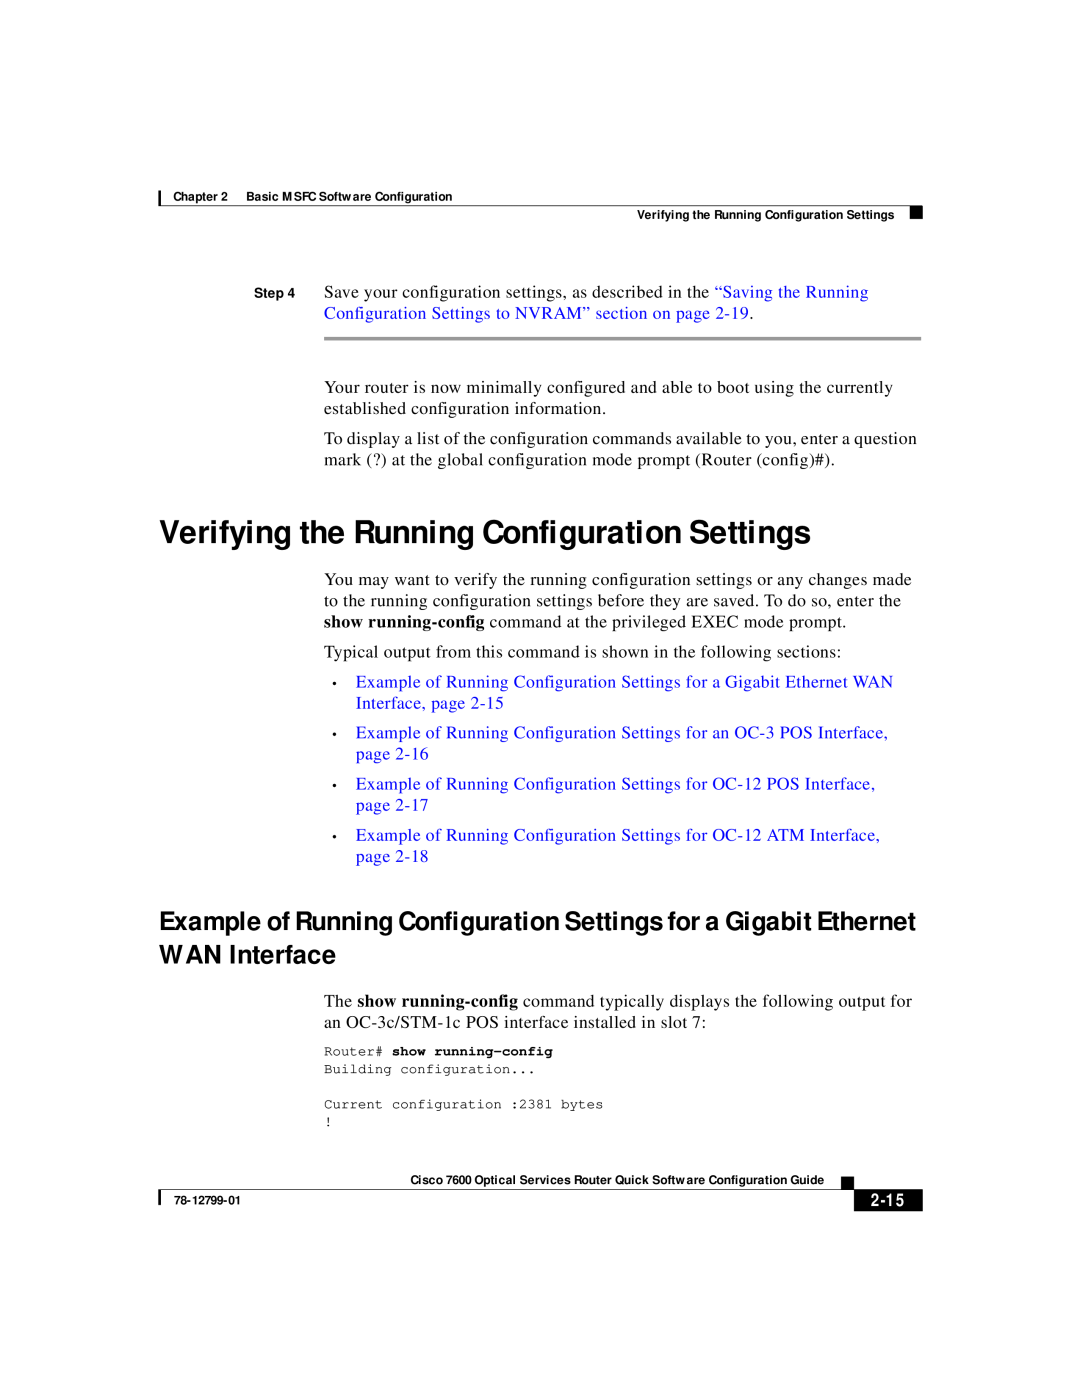 Cisco Systems 7600 manual Verifying the Running Configuration Settings, 2-15 